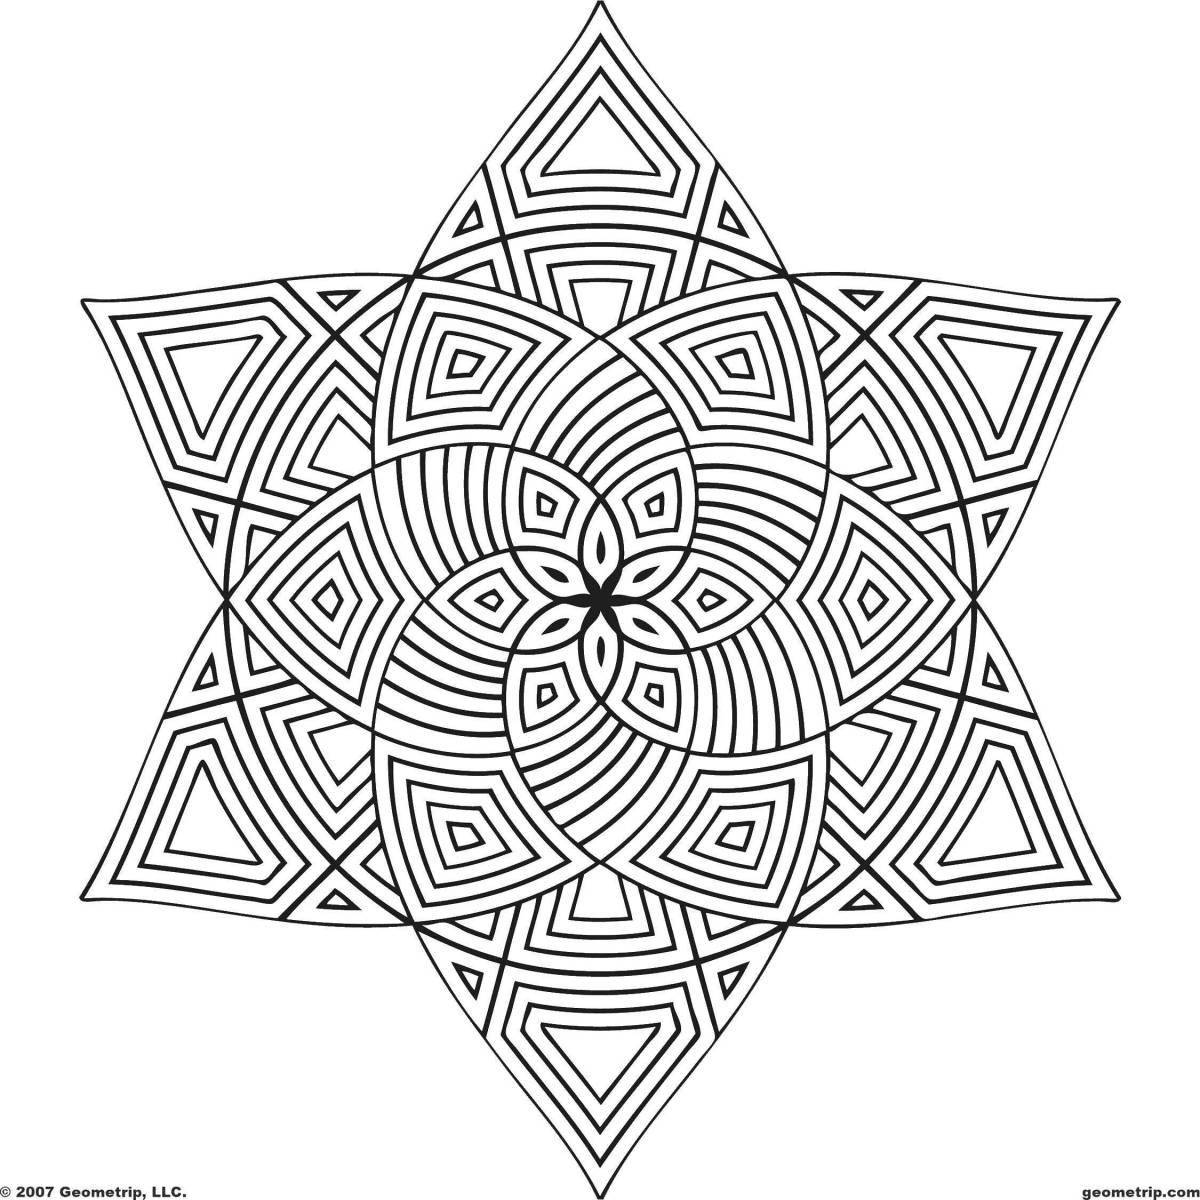 Coloring page with attractive geometric pattern